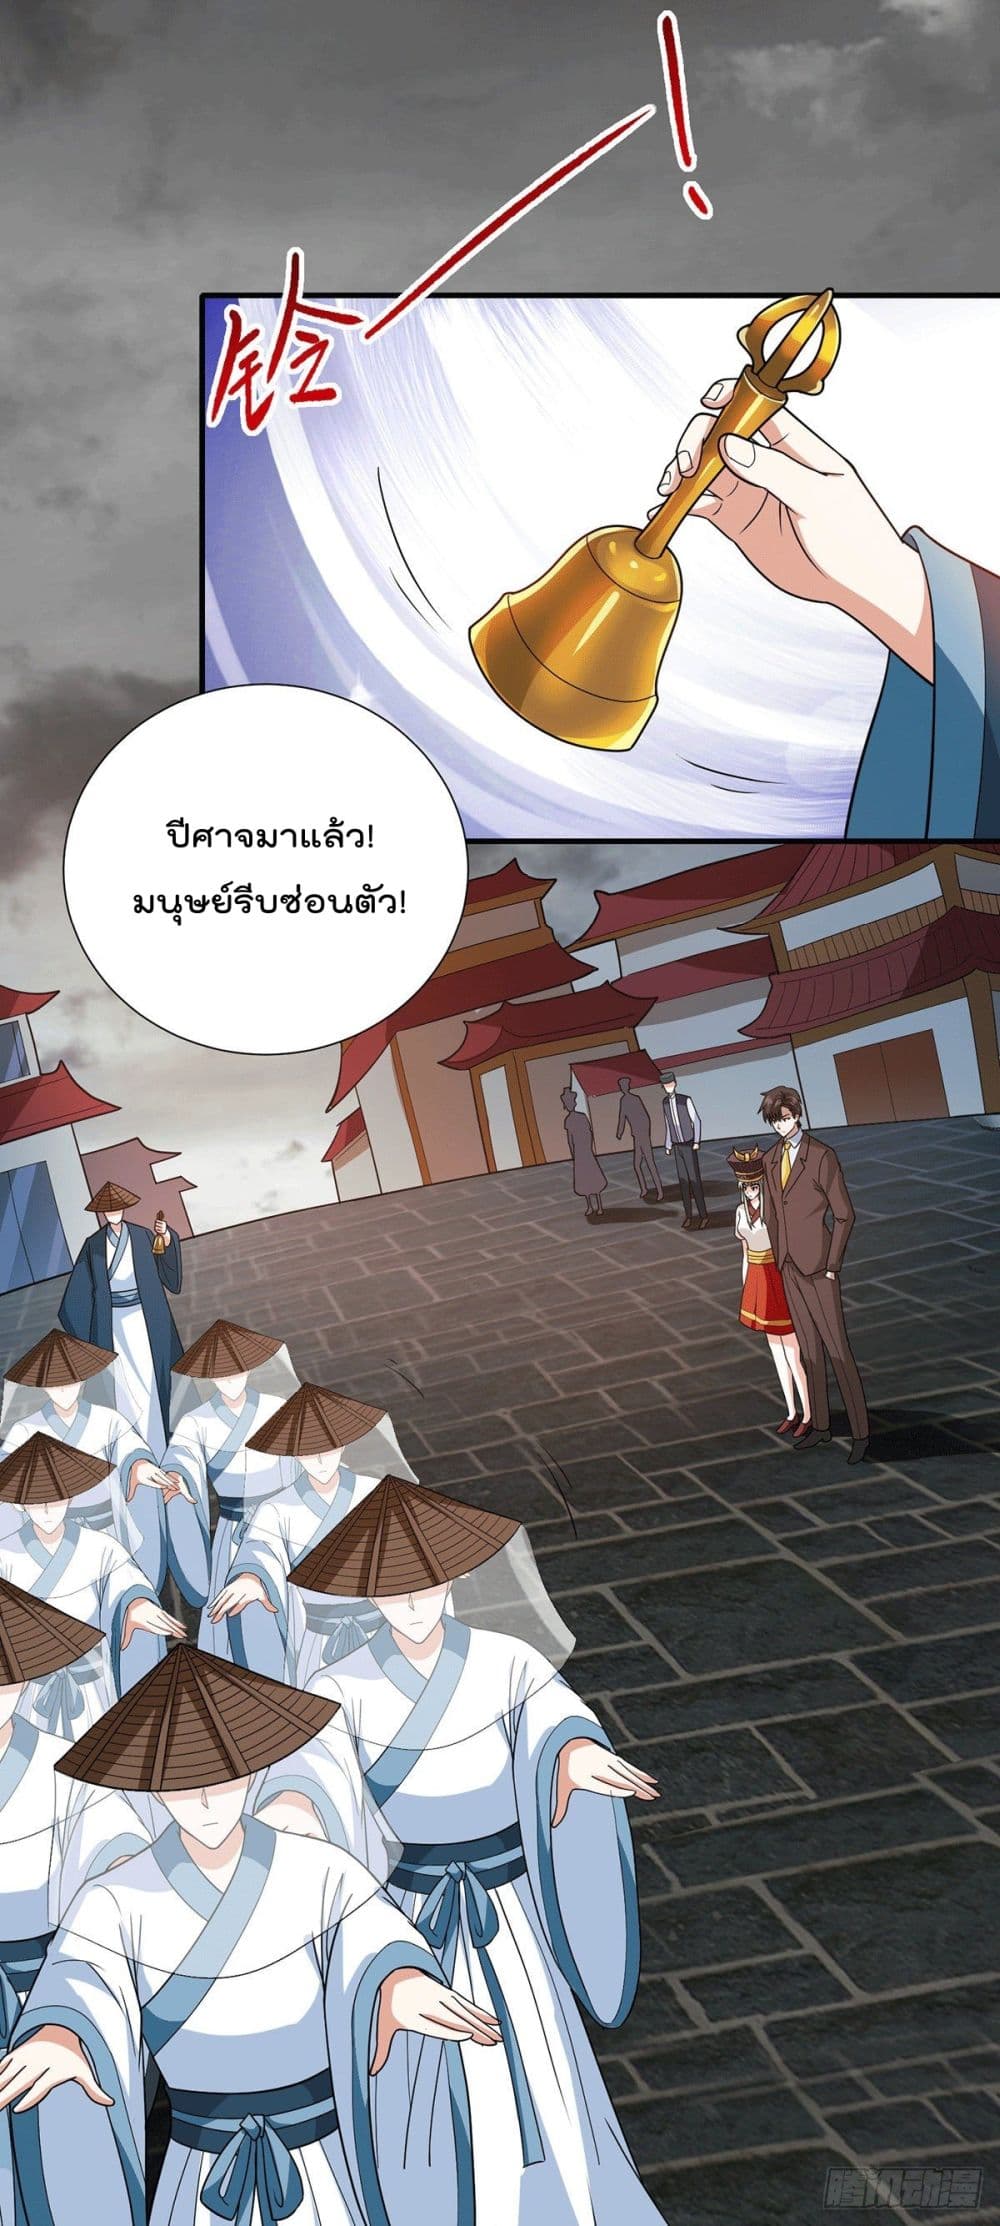 God Dragon of War in The City 68 (8)